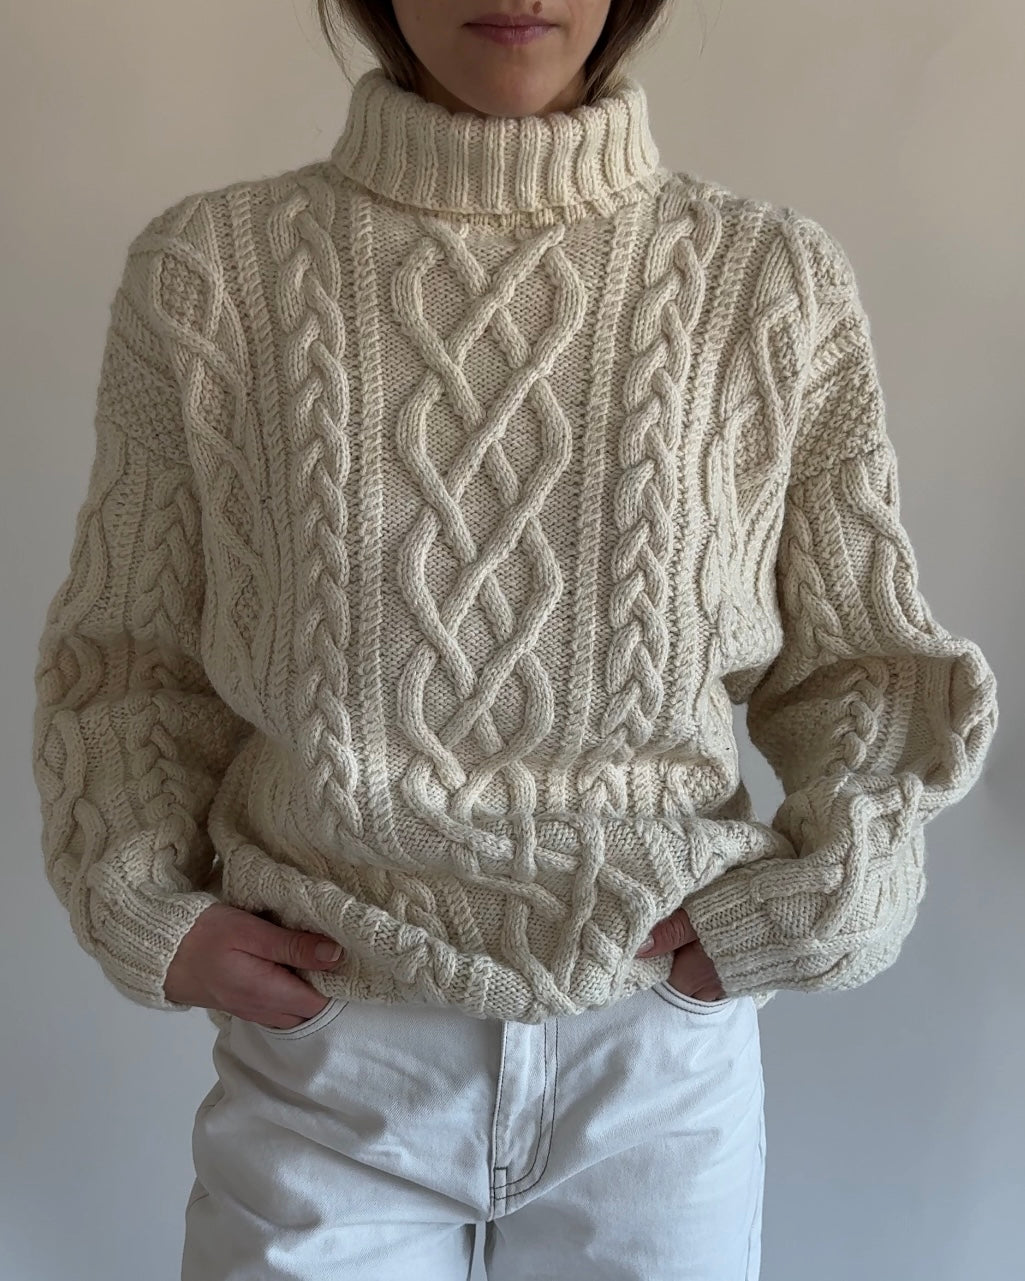 Cable Knit Turtleneck Pullover